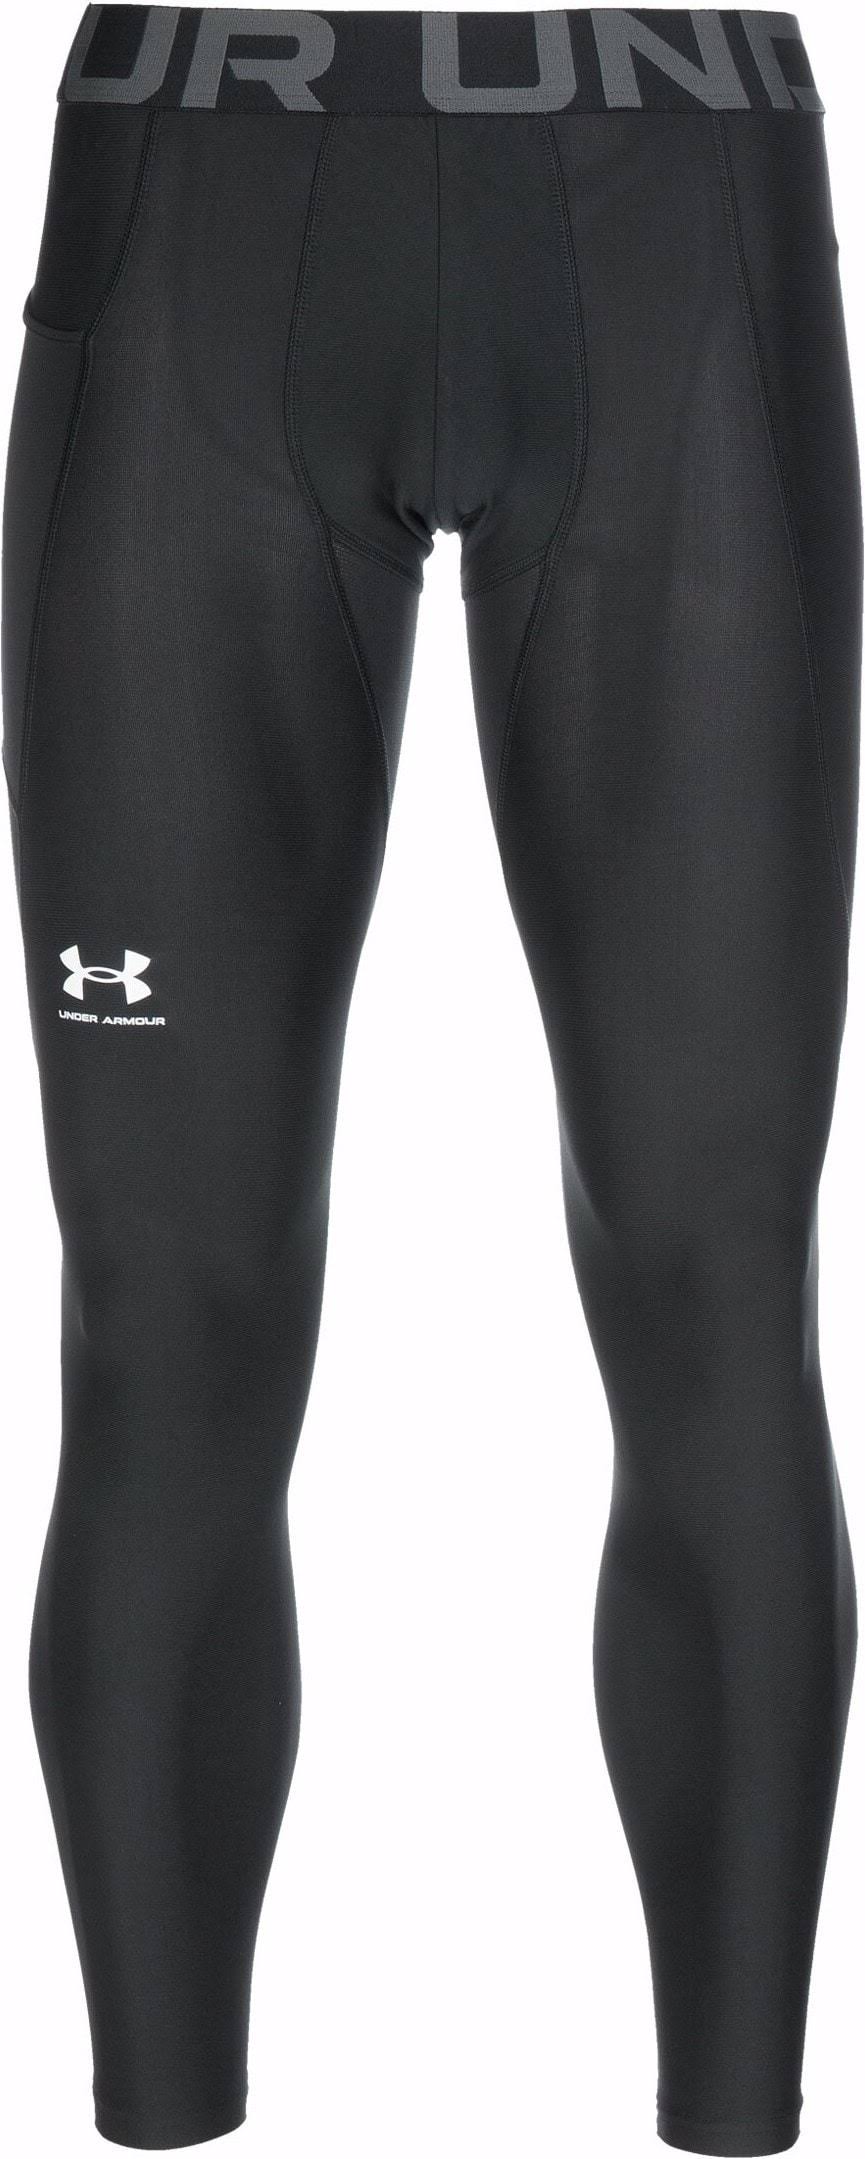 Under Armour Men's Packaged Base 2.0 Legging - Black and Pitch Grey, 3X-Large